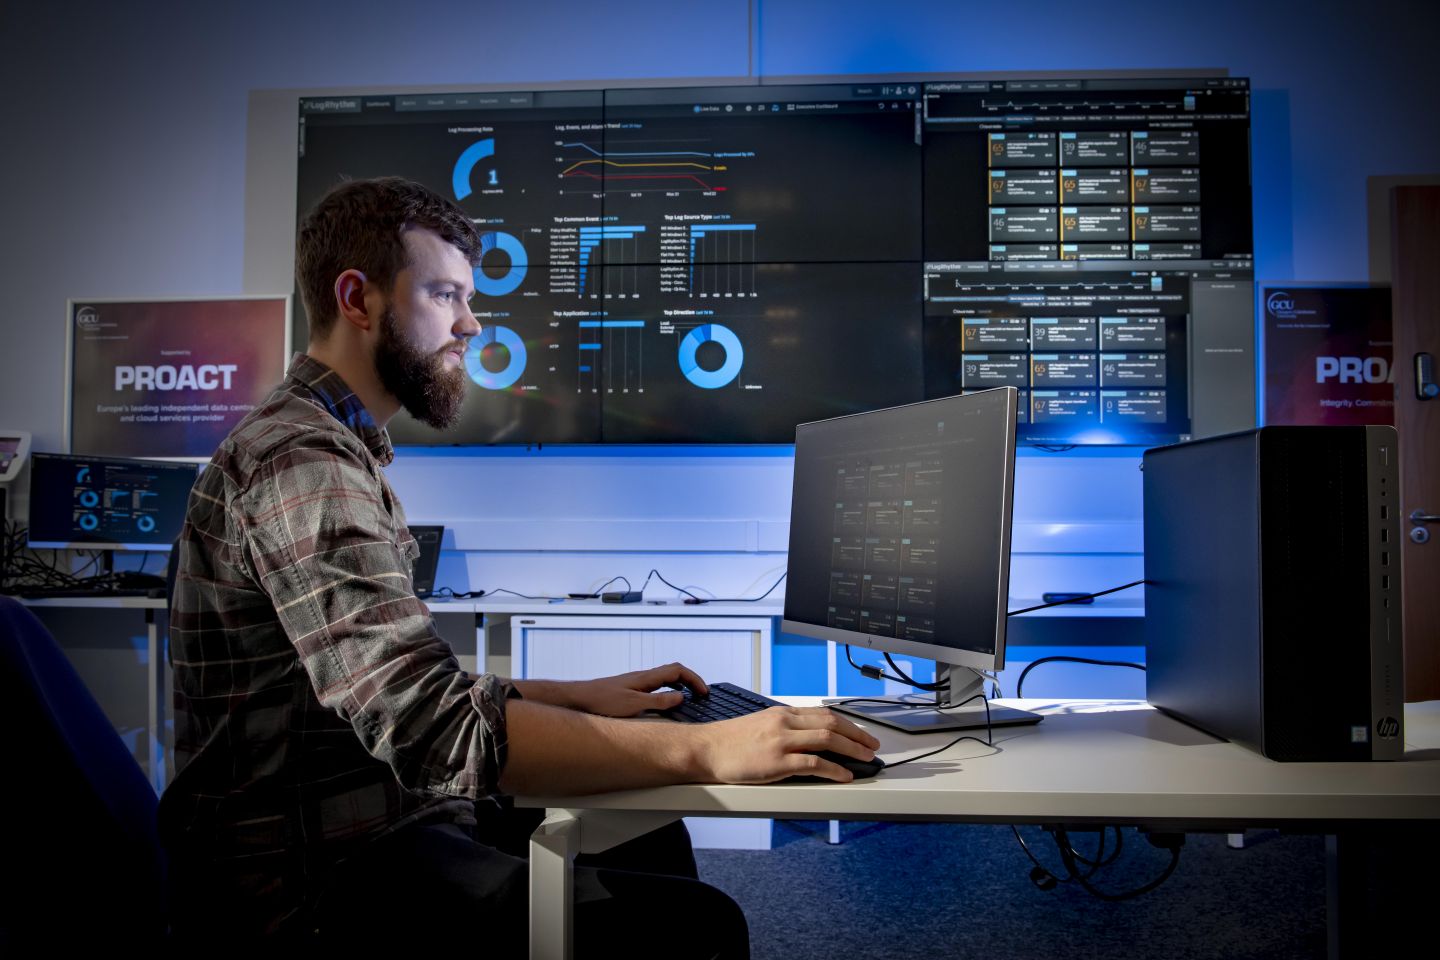 State-of-the-art lab that allows students to experience and combat ‘real-life’ cyber-attacks.